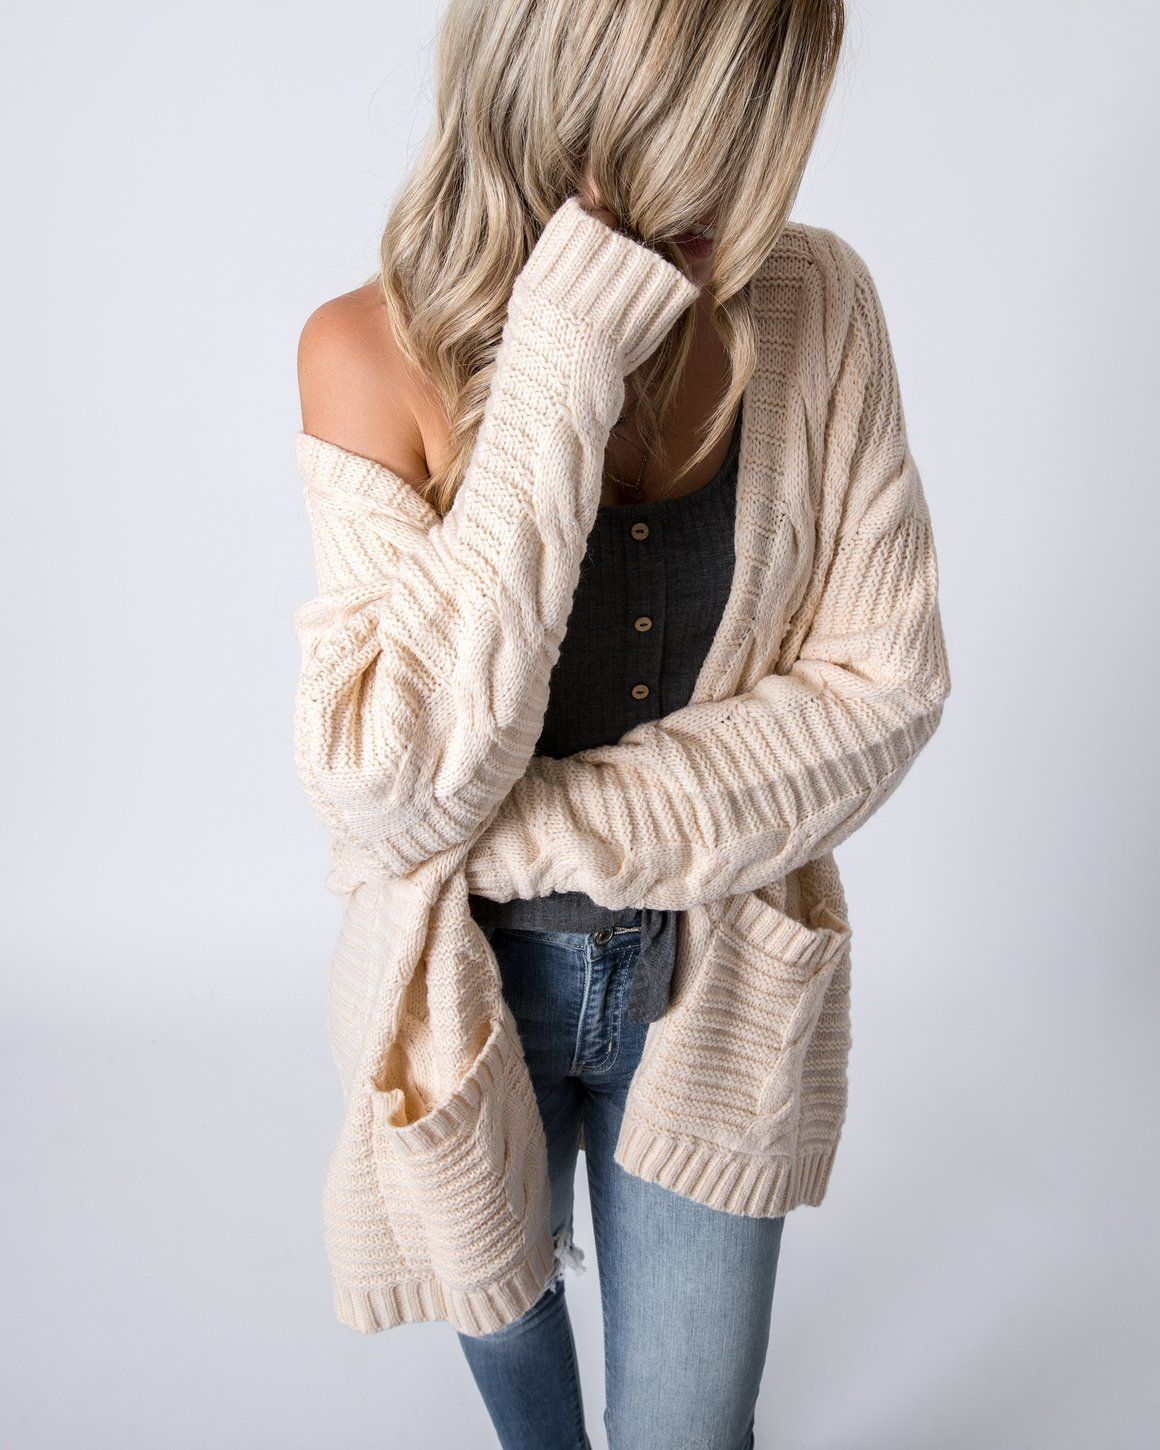 Cardigans For Fall-Winter